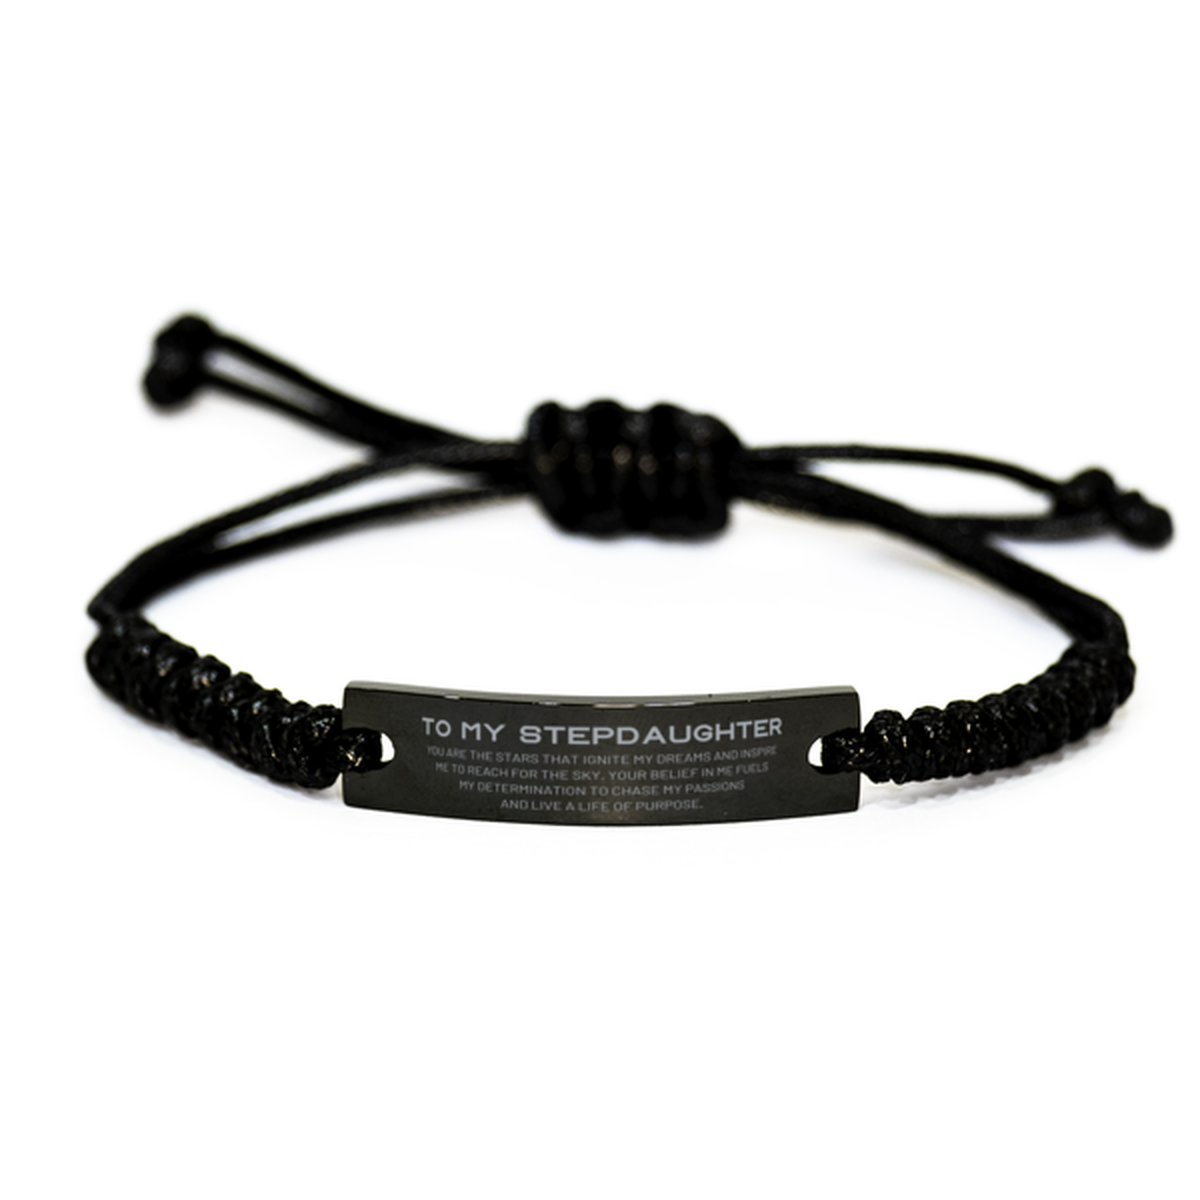 To My Stepdaughter Black Rope Bracelet, You are the stars that ignite my dreams and inspire me to reach for the sky, Birthday Unique Gifts For Stepdaughter, Thank You Gifts For Stepdaughter